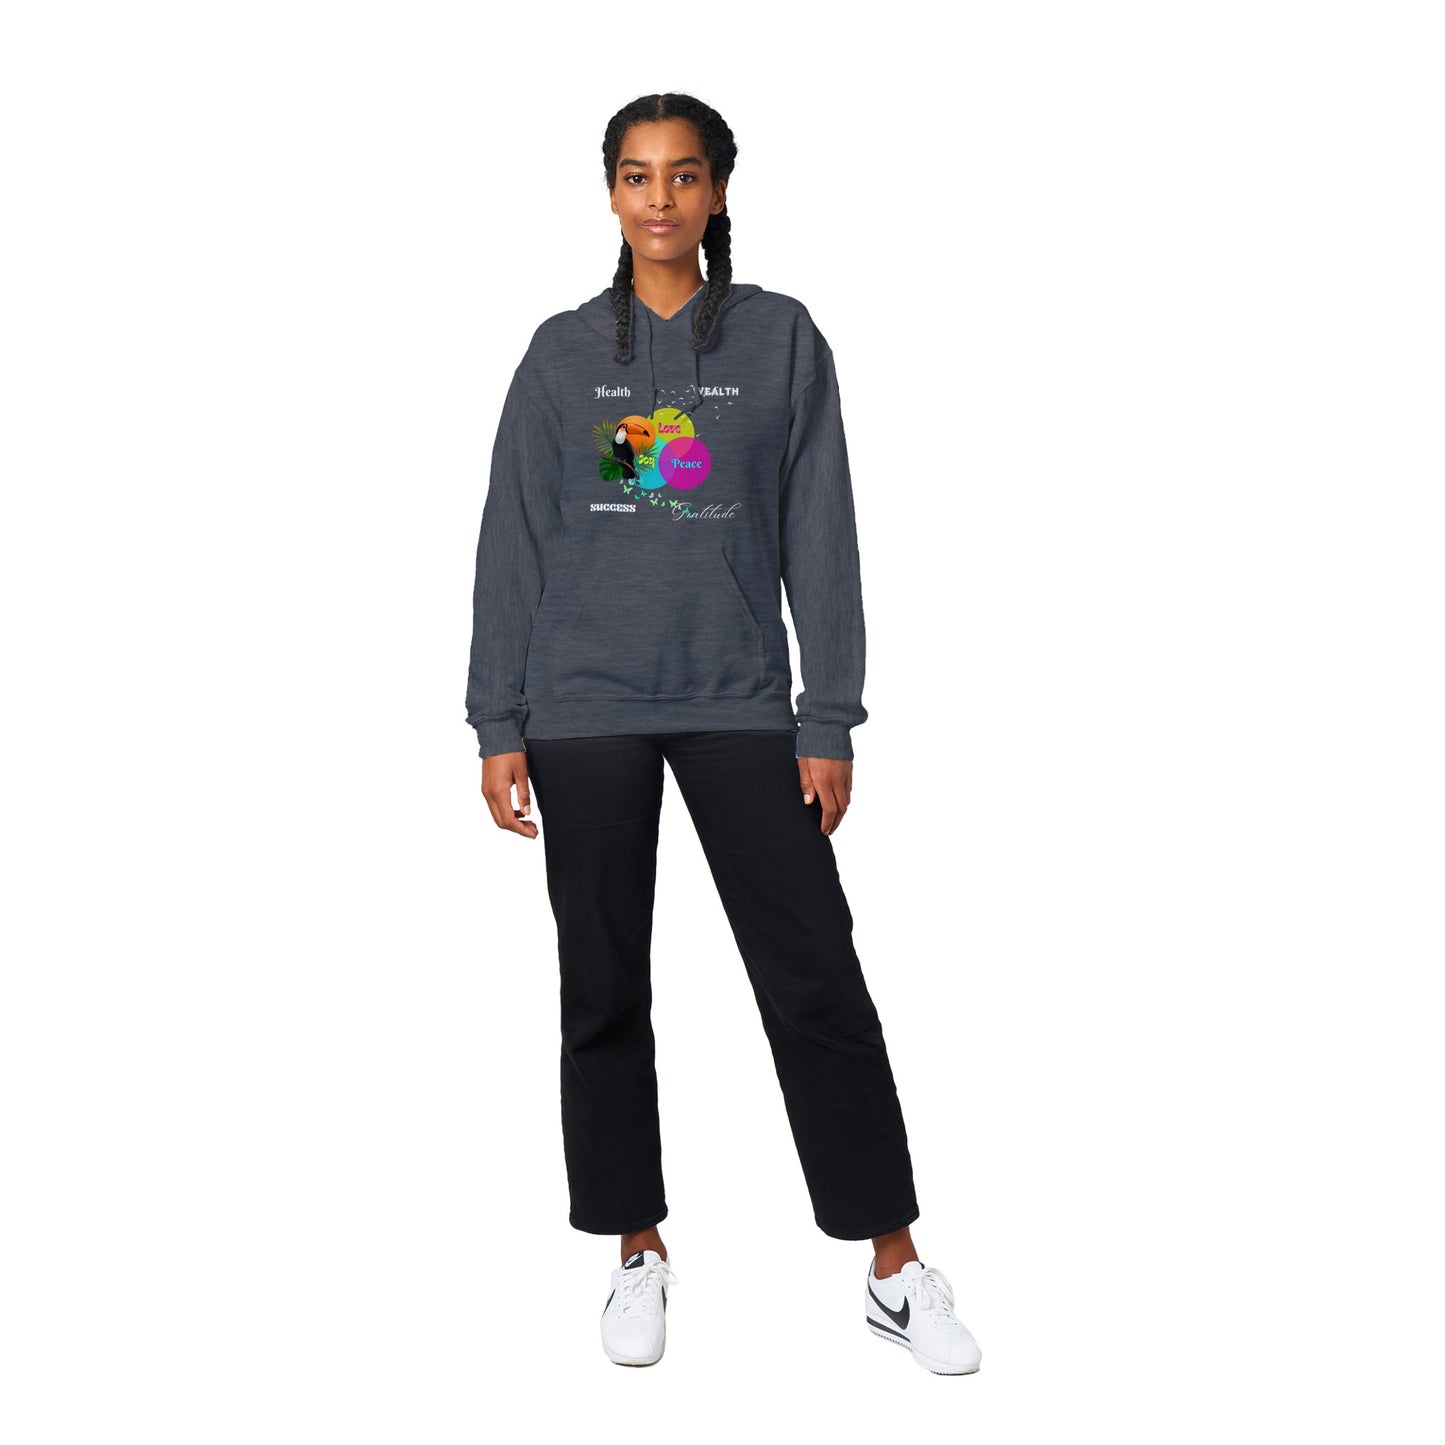 Inspirational - Motivational - Attract Blessings & Love  Women Pullover Hoodie